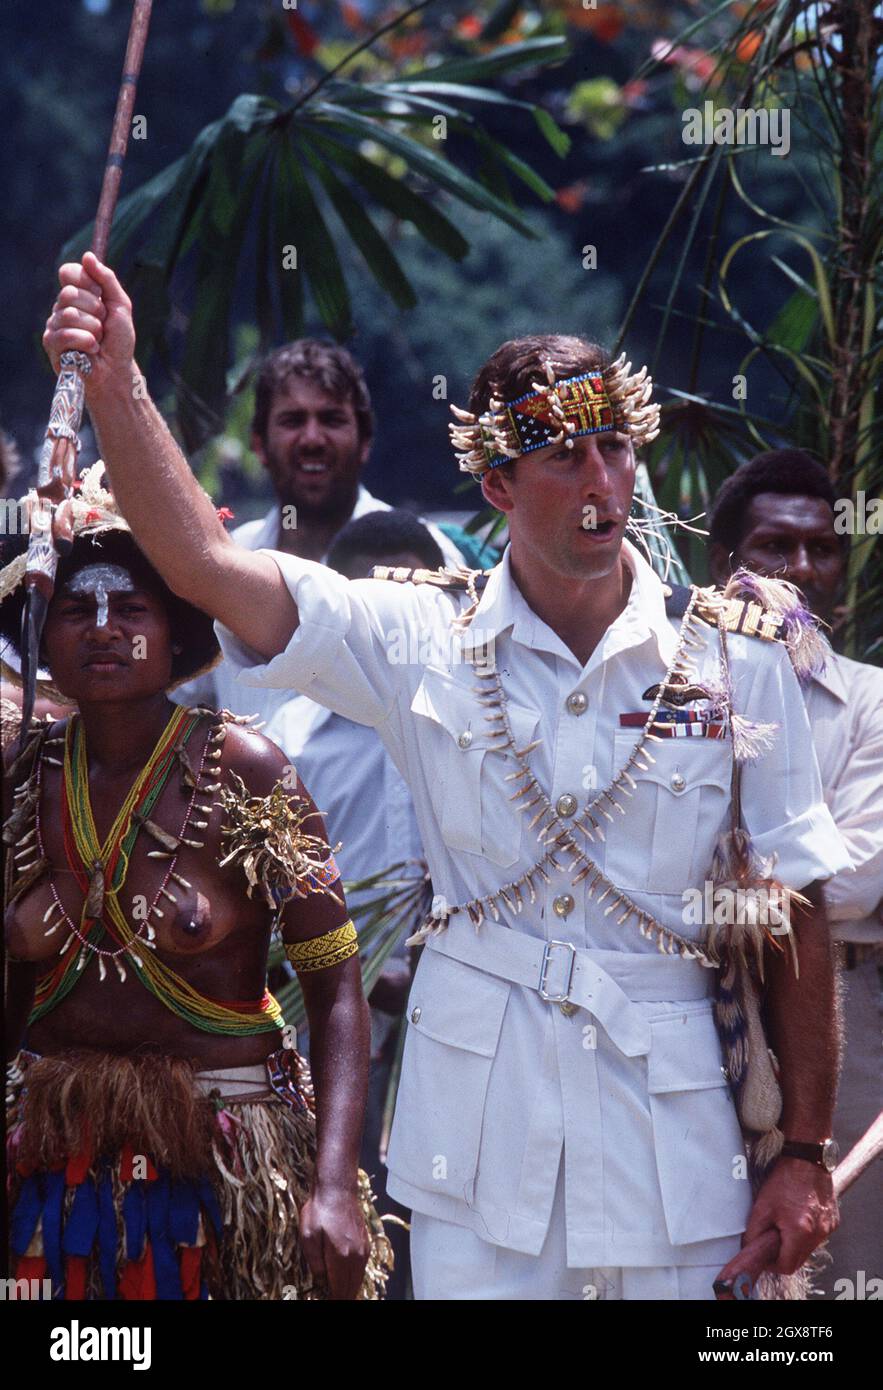 The Prince of Wales brandishes a spear in Papua New Guinea in 1984. Anwar Hussein/allactiondigital.com  Stock Photo